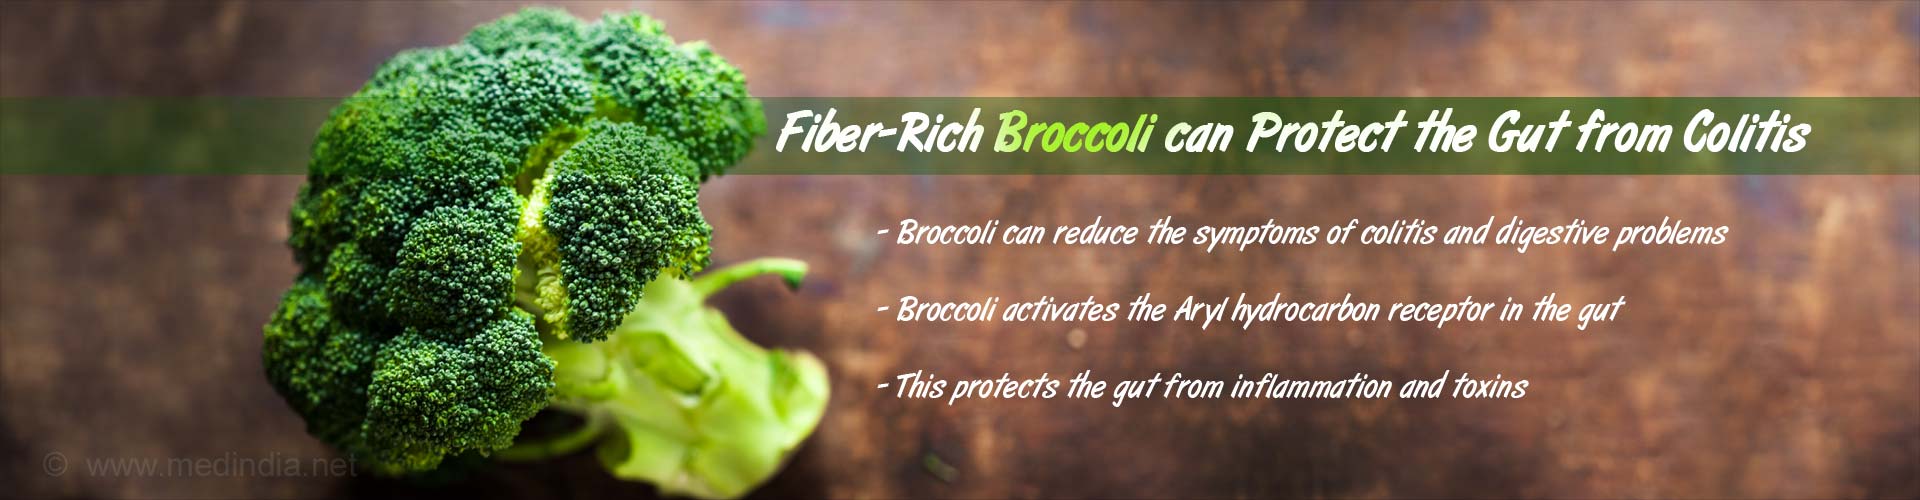 Fiber-rich broccoli can protect the gut from colitis
- Broccoli can reduce the symptoms of colitis and digestive problems
- Broccoli activates the Aryl hydrocarbon receptor in the gut
- This protects the gut from inflammation and toxins